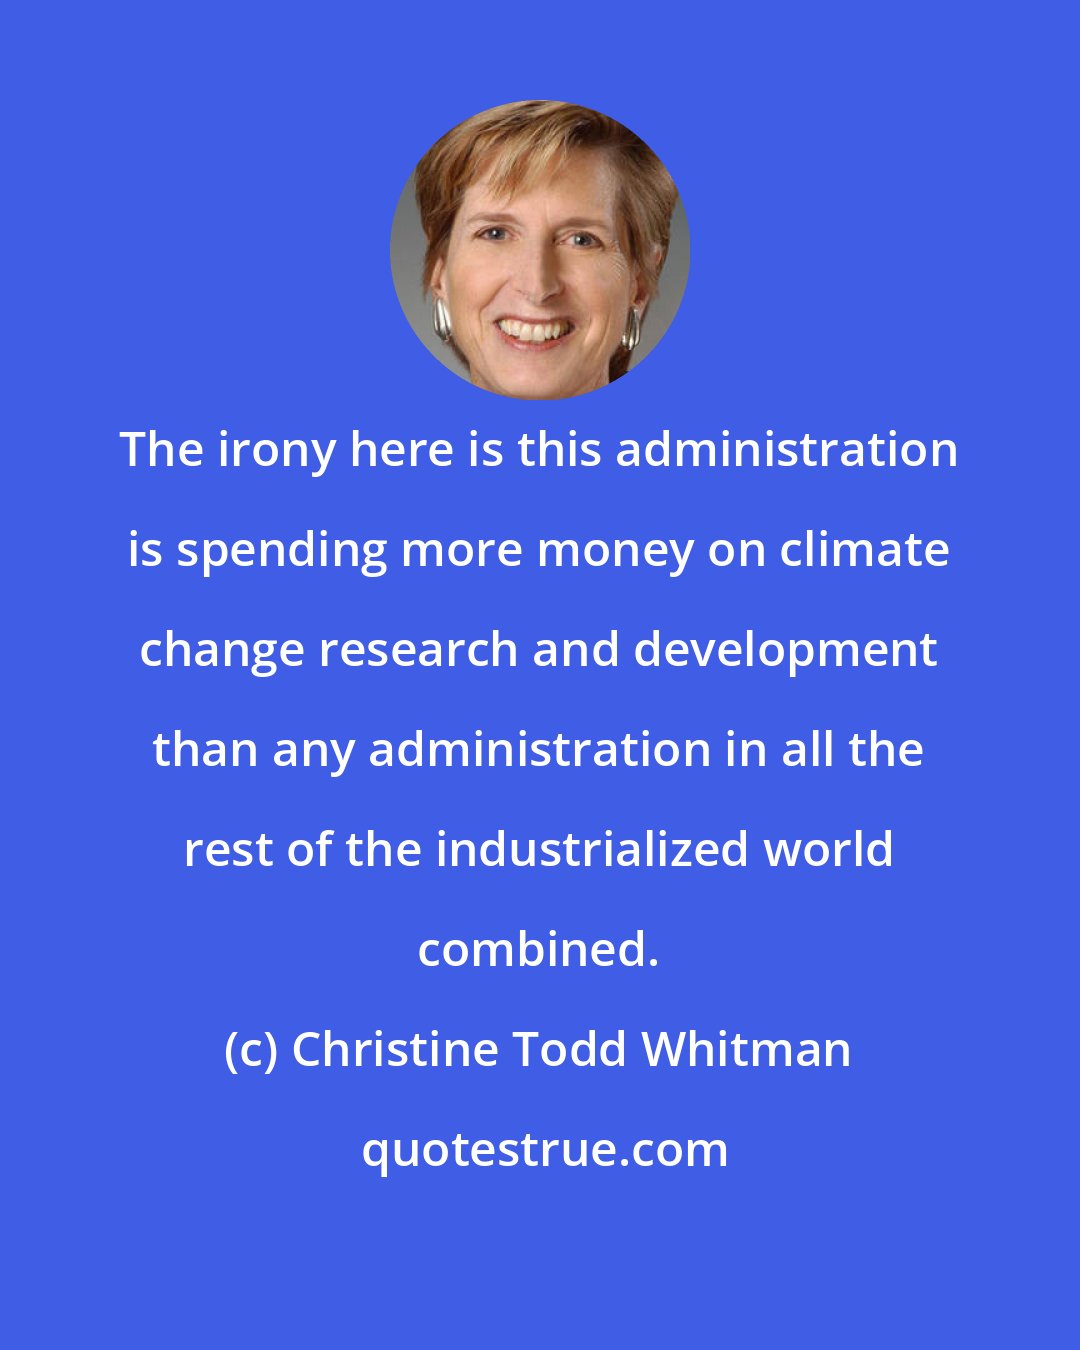 Christine Todd Whitman: The irony here is this administration is spending more money on climate change research and development than any administration in all the rest of the industrialized world combined.